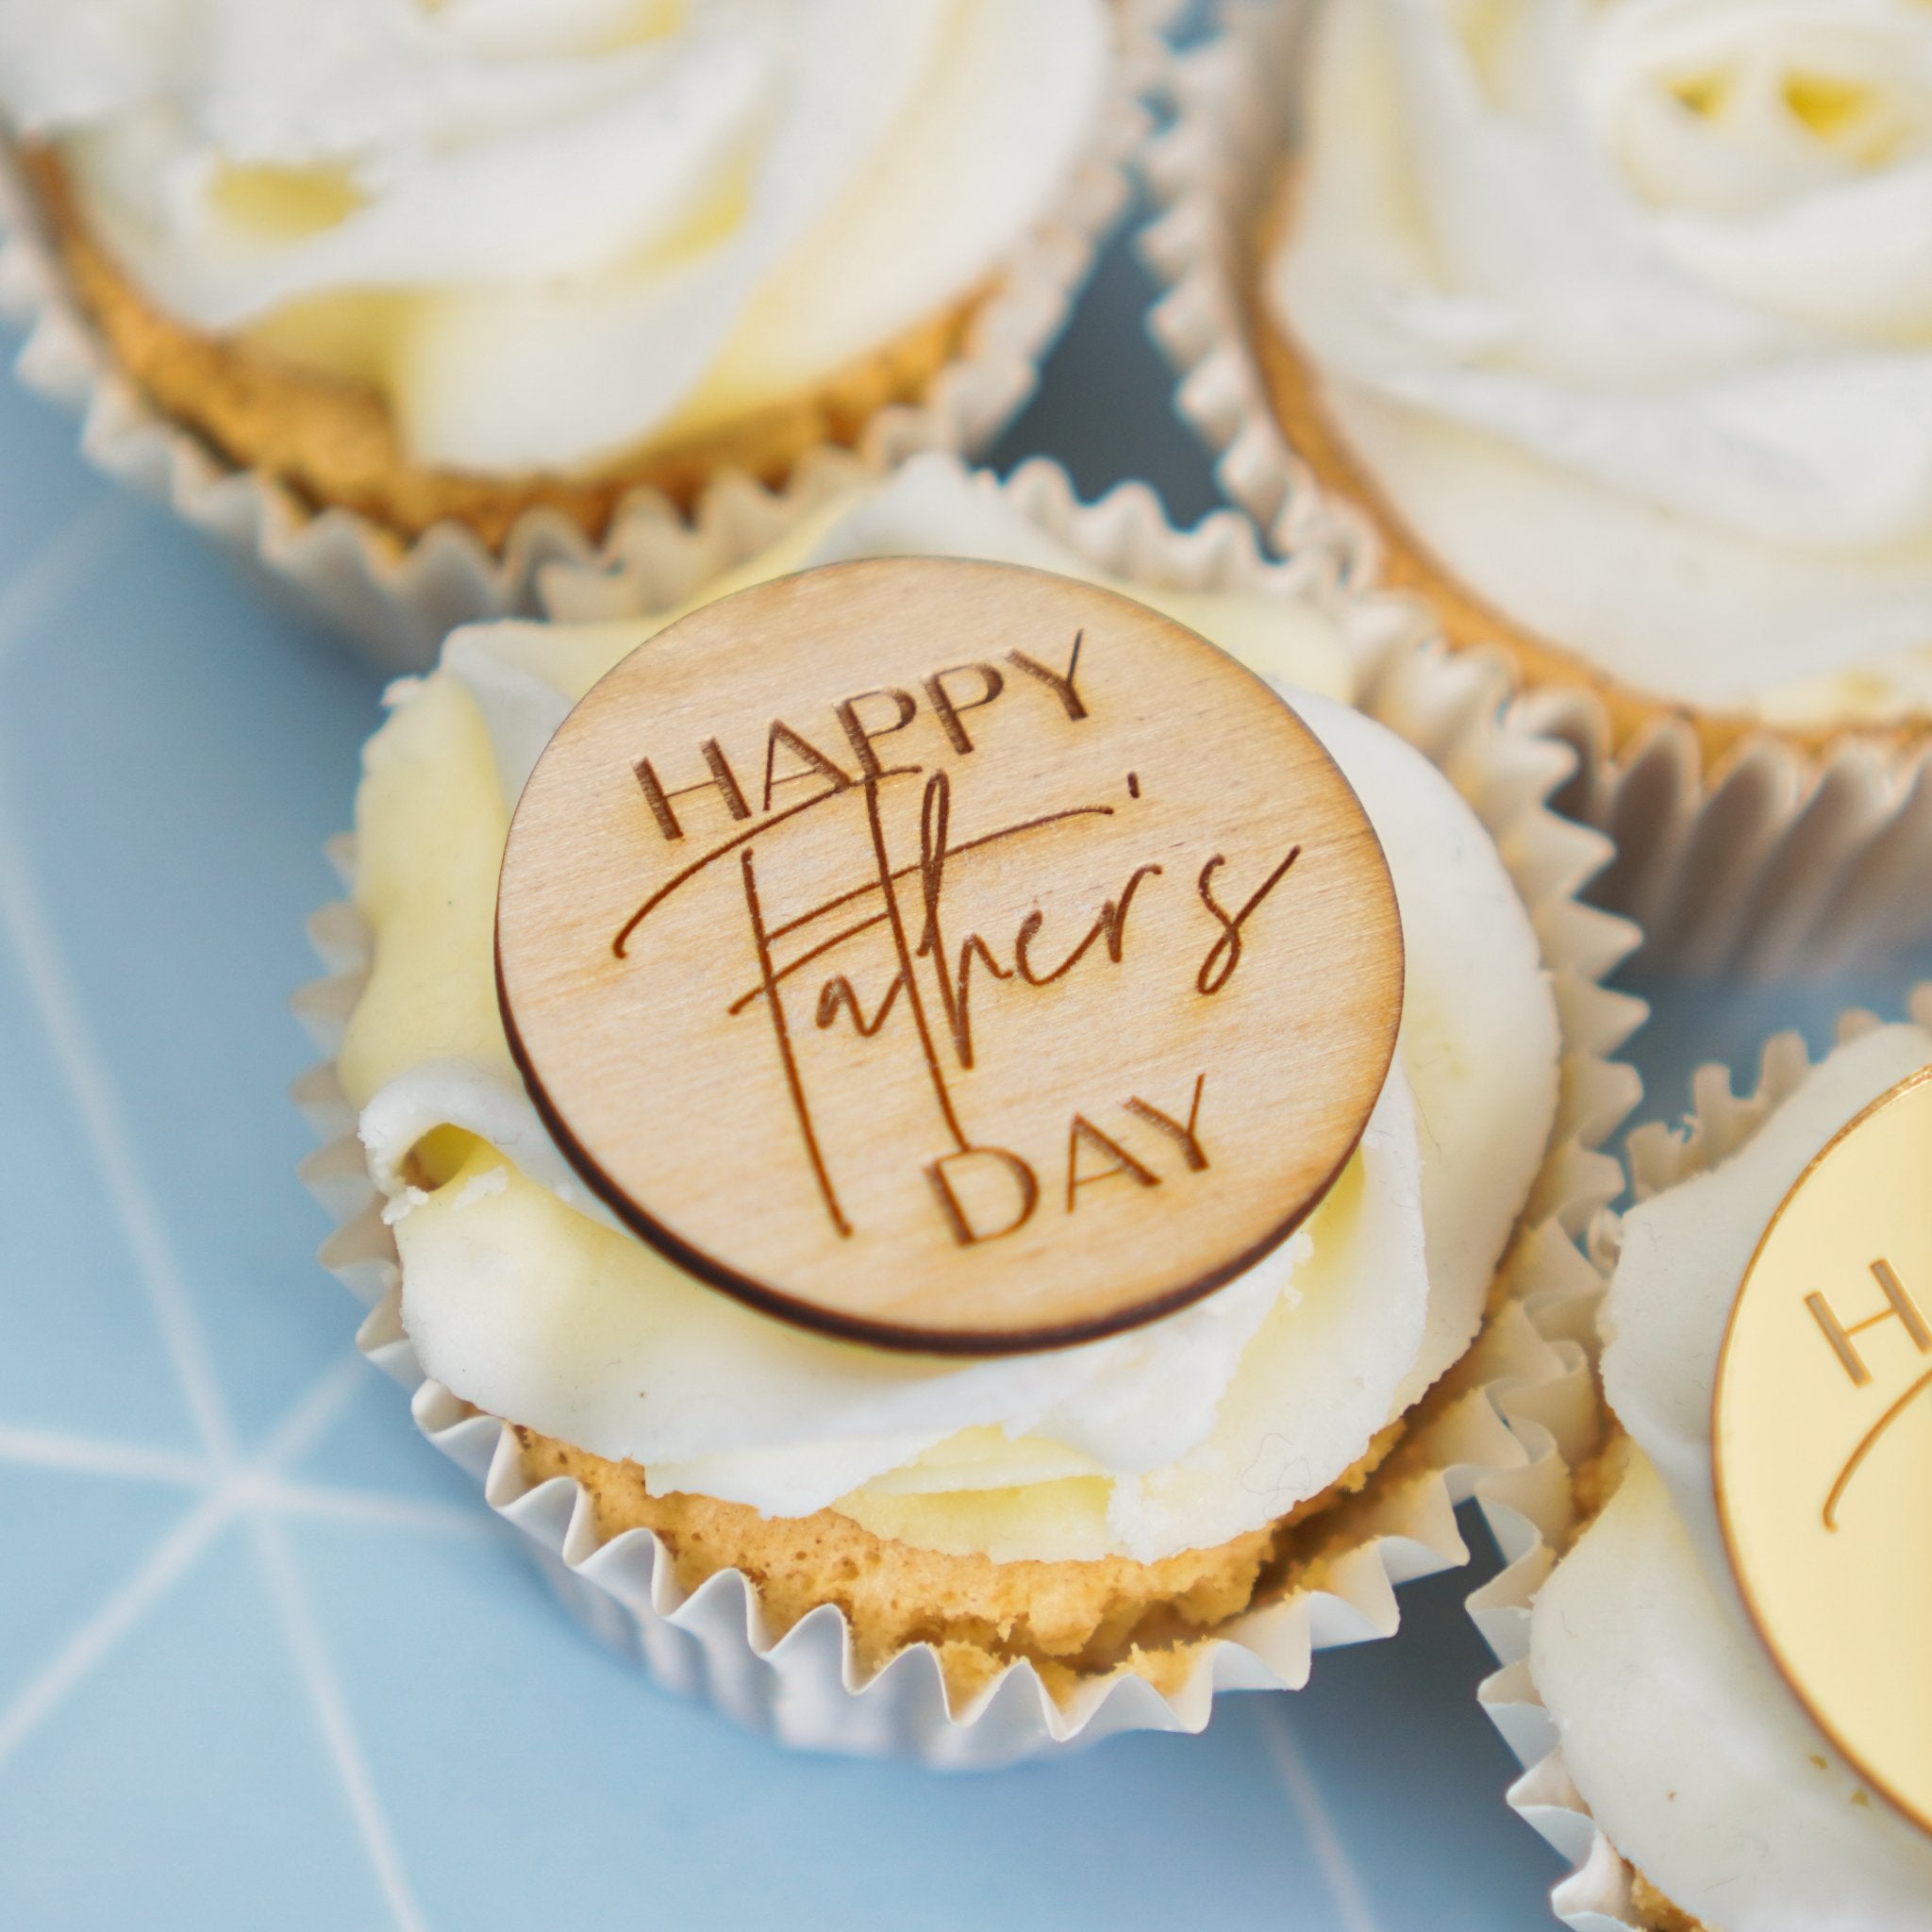 Happy Fathers Day Cupcake Toppers